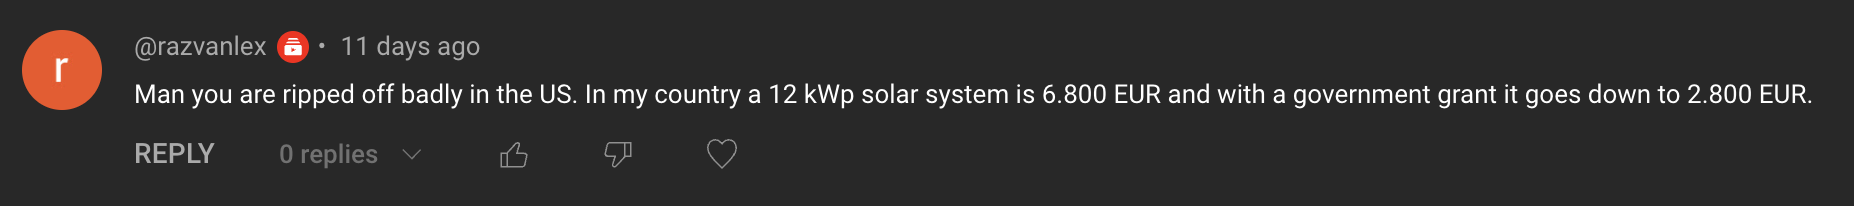 Comment: Man you are ripped off badly in the US. In my country a 12 kWp solar system is 6,800 EUR and with a government grant it goes down to 2,800 EUR.